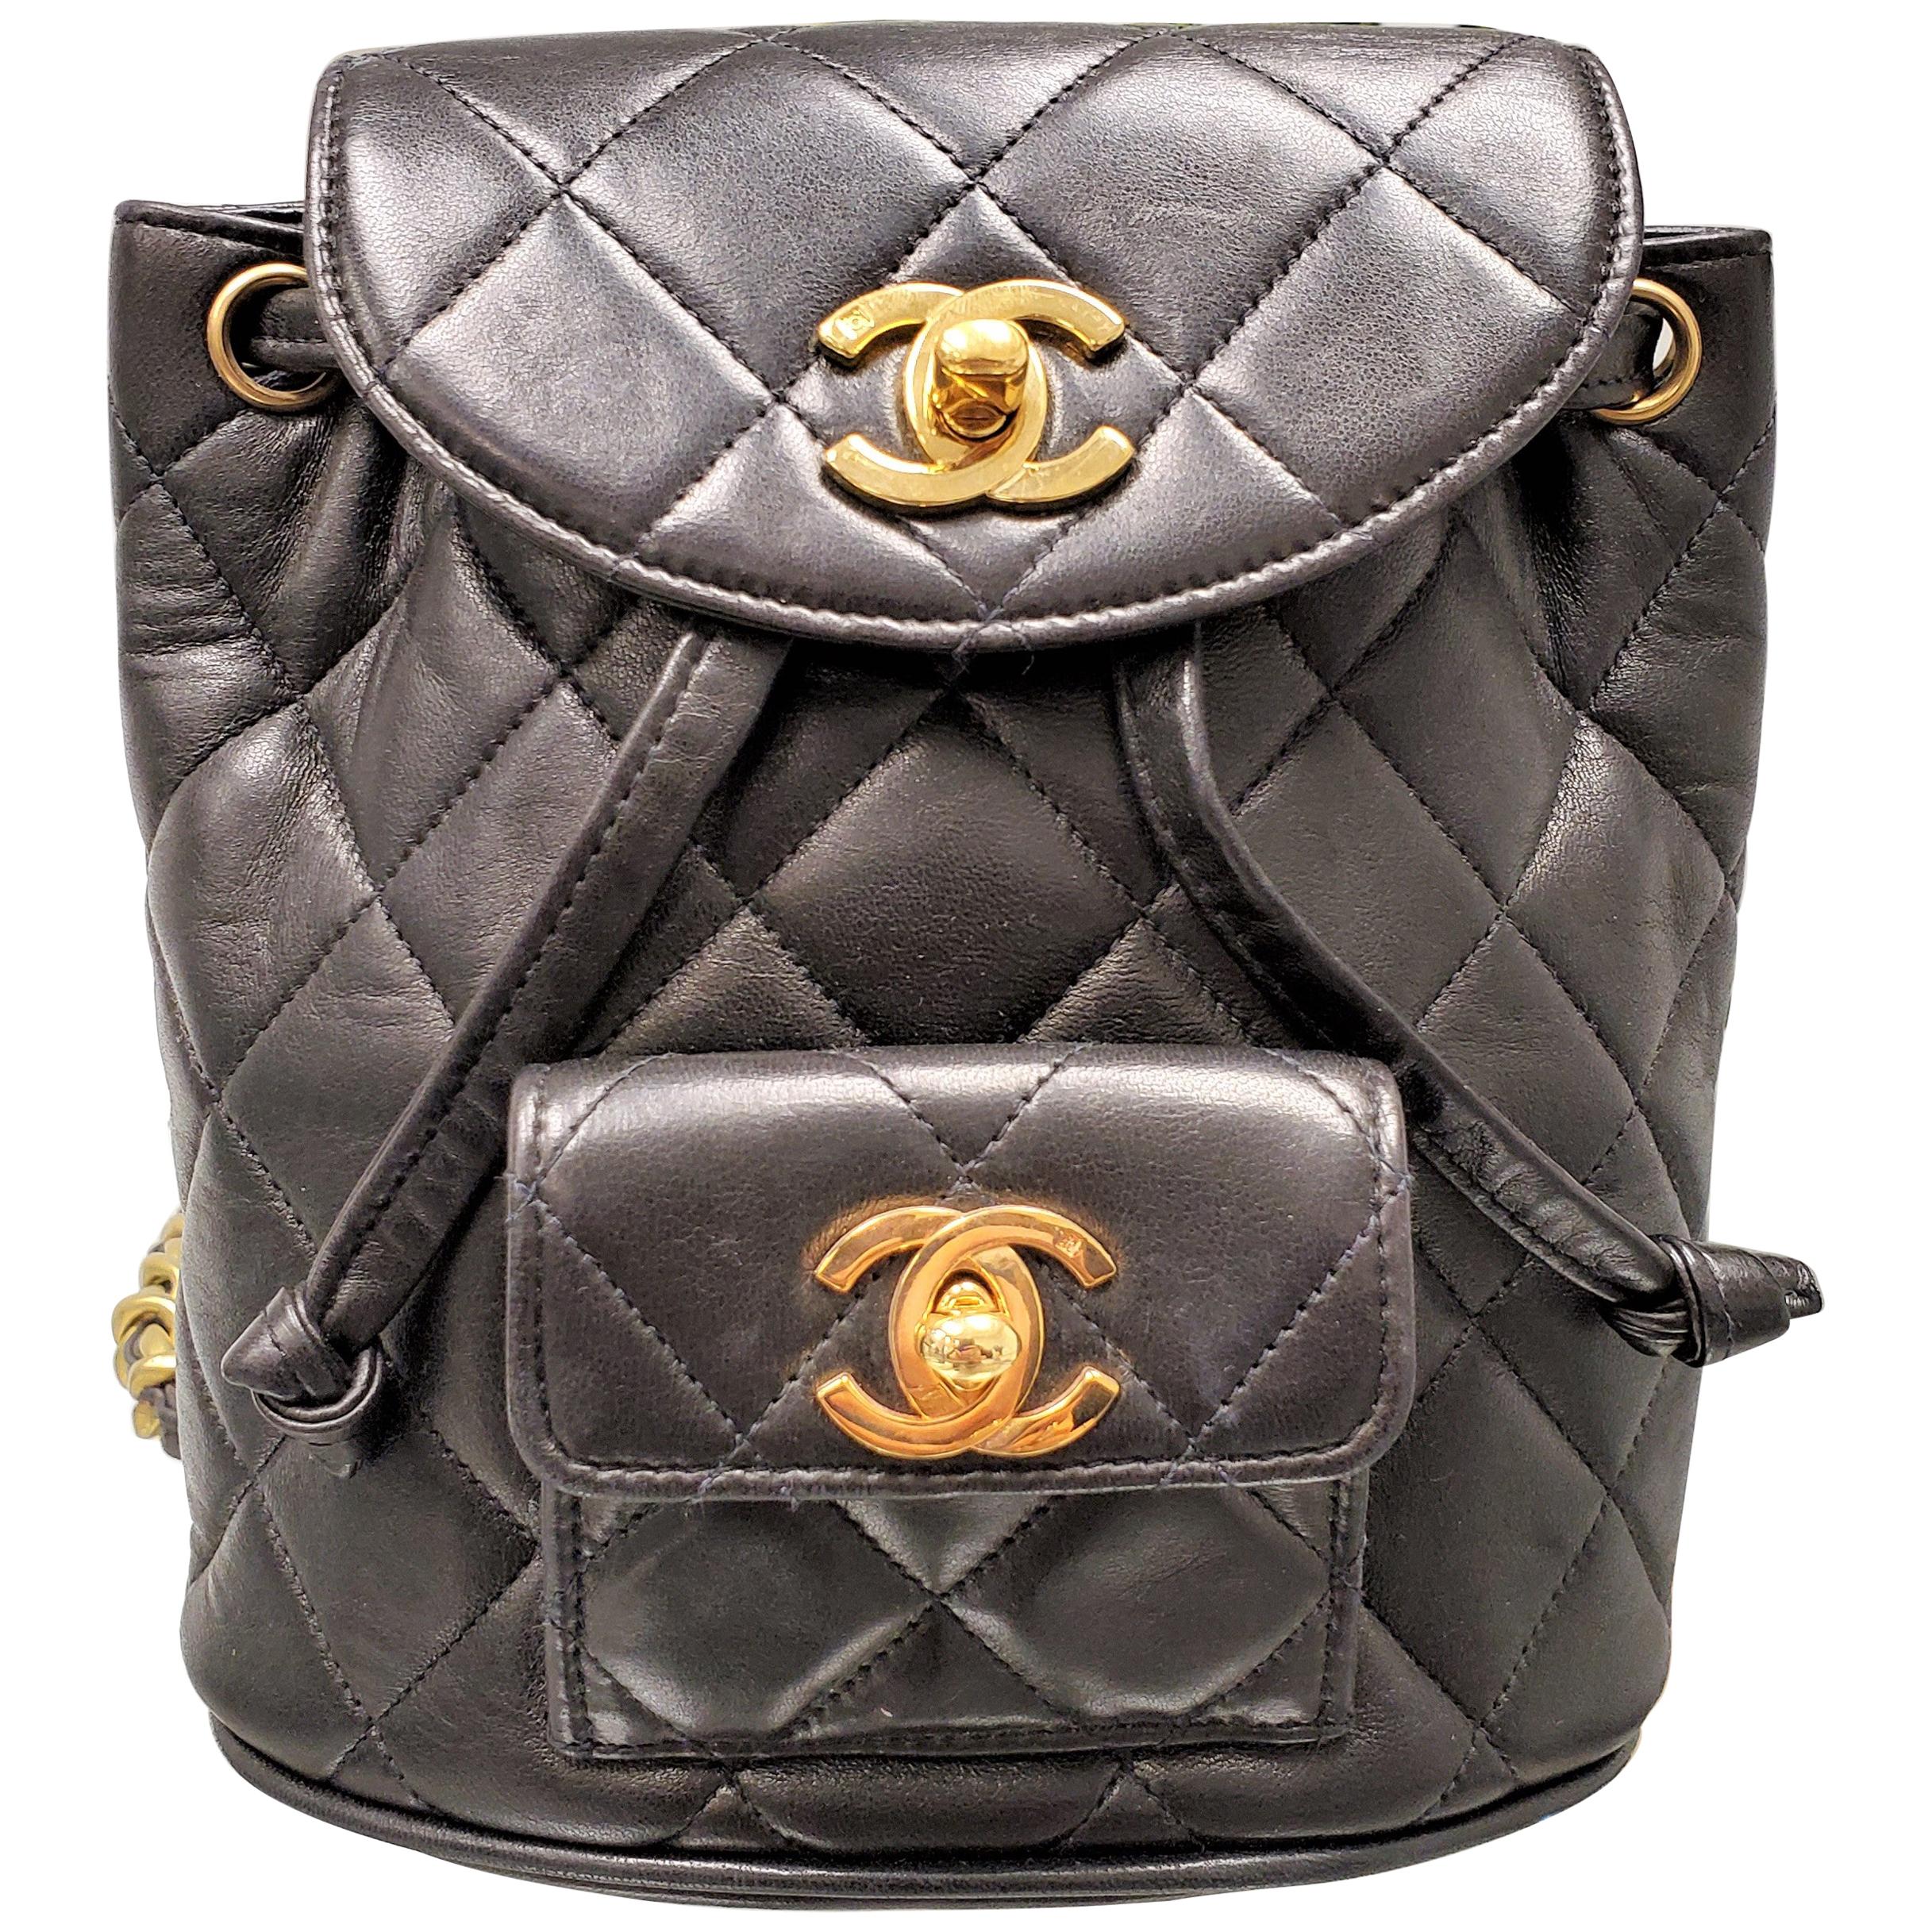 BALO CHANEL SMALL BACKPACK GRAINED SHINY CALFSKIN  GOLD CAO CẤP